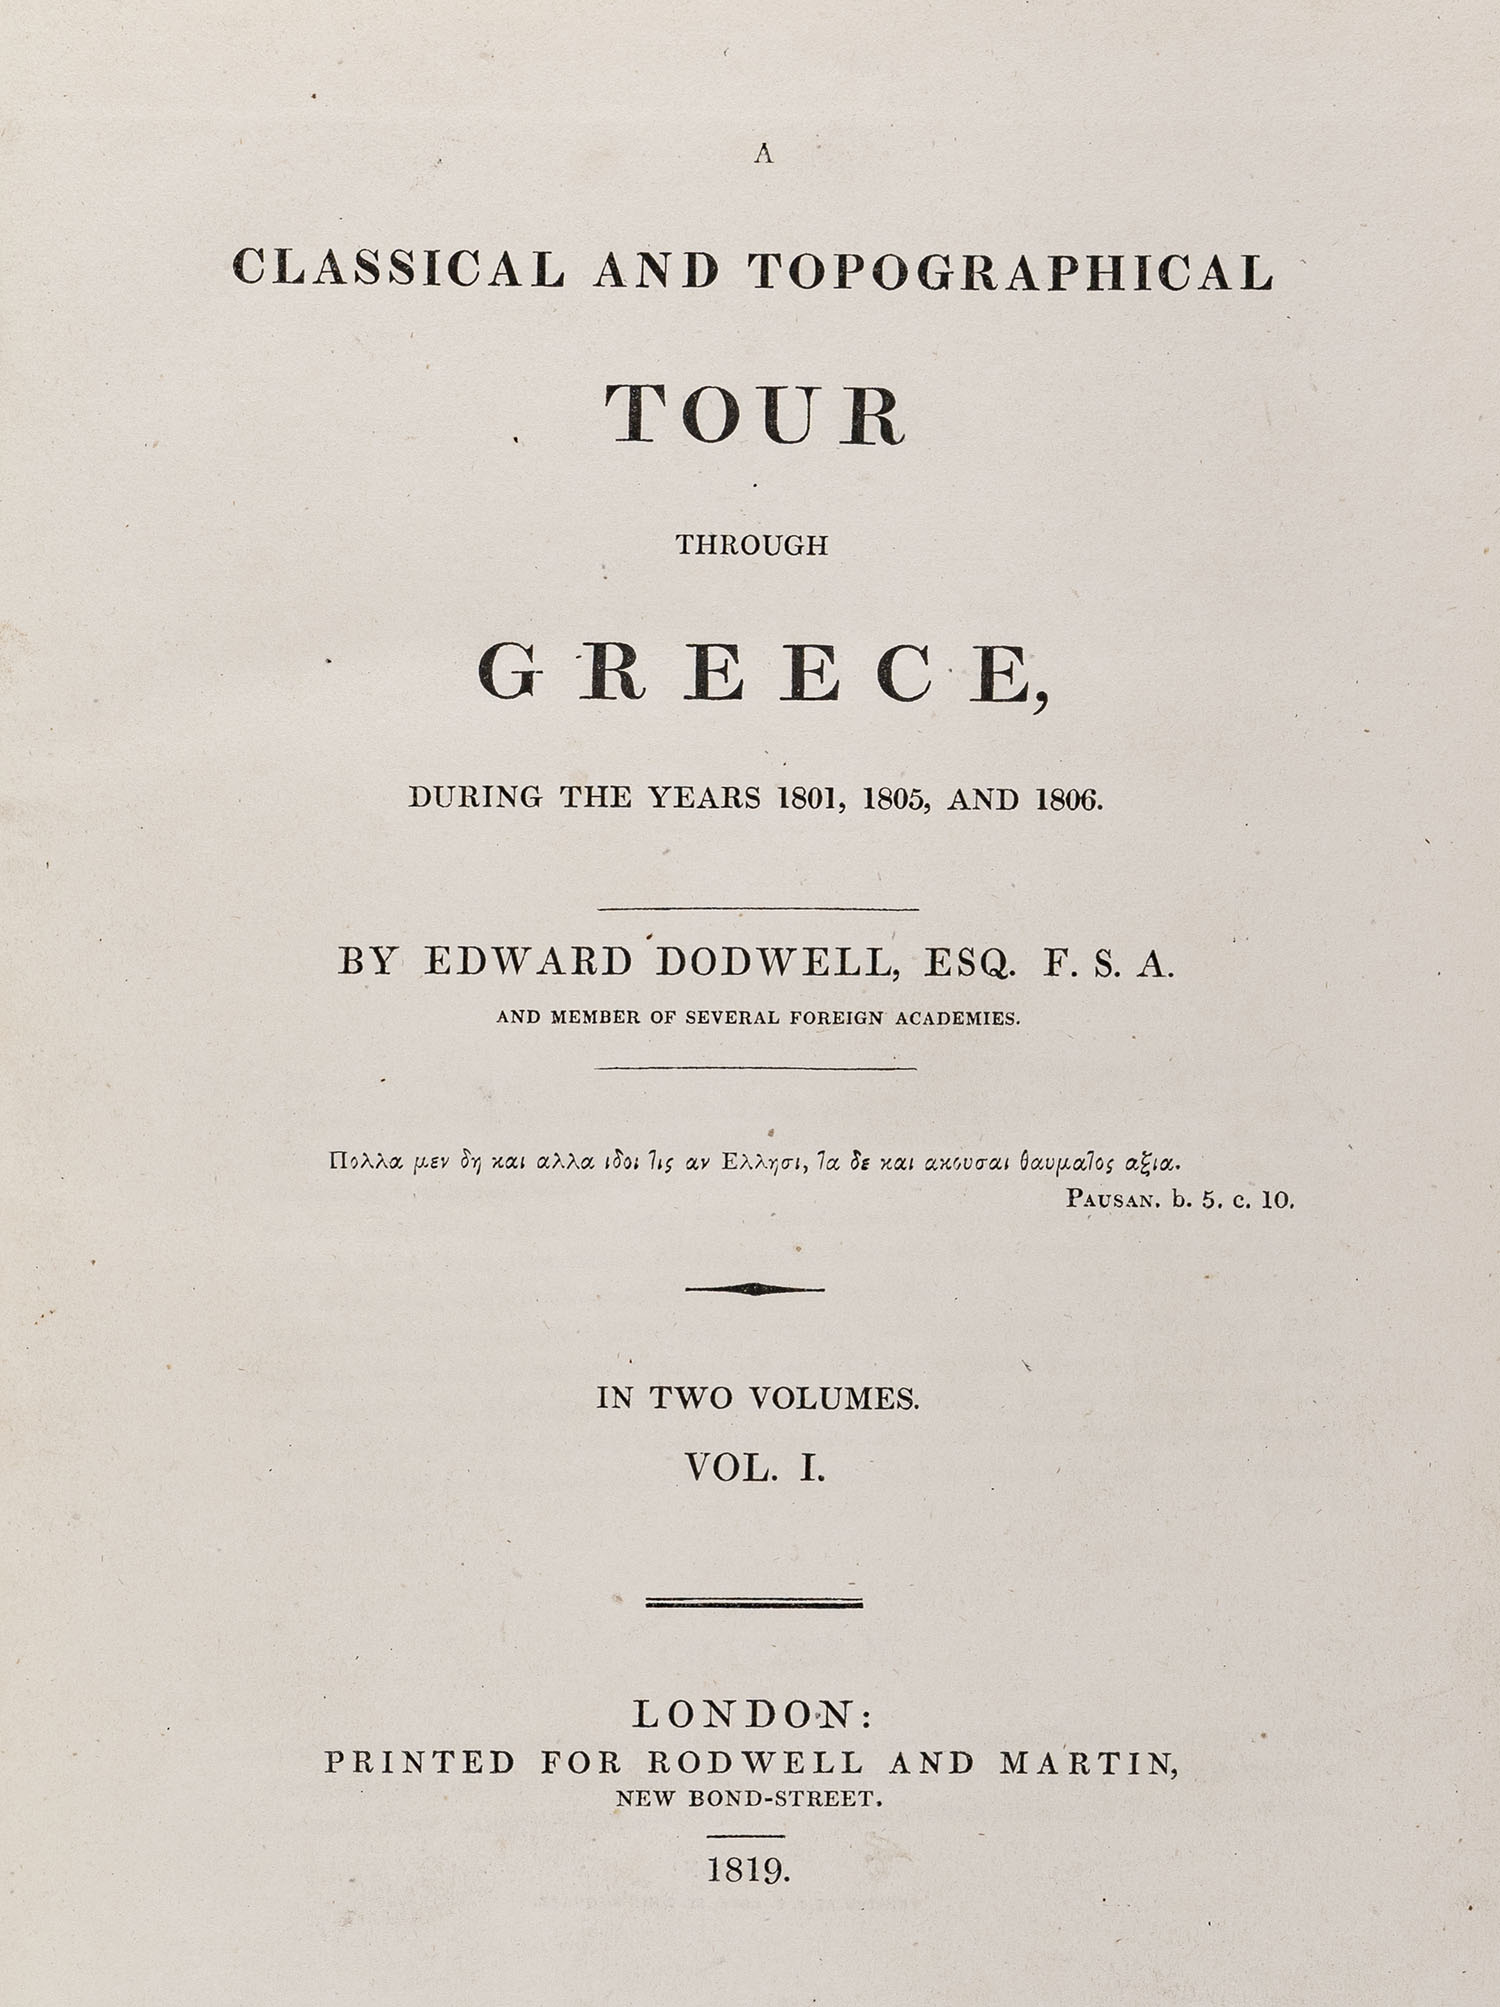 A classical and topographical tour through Greece, during the years 1801, 1805, and 1806.